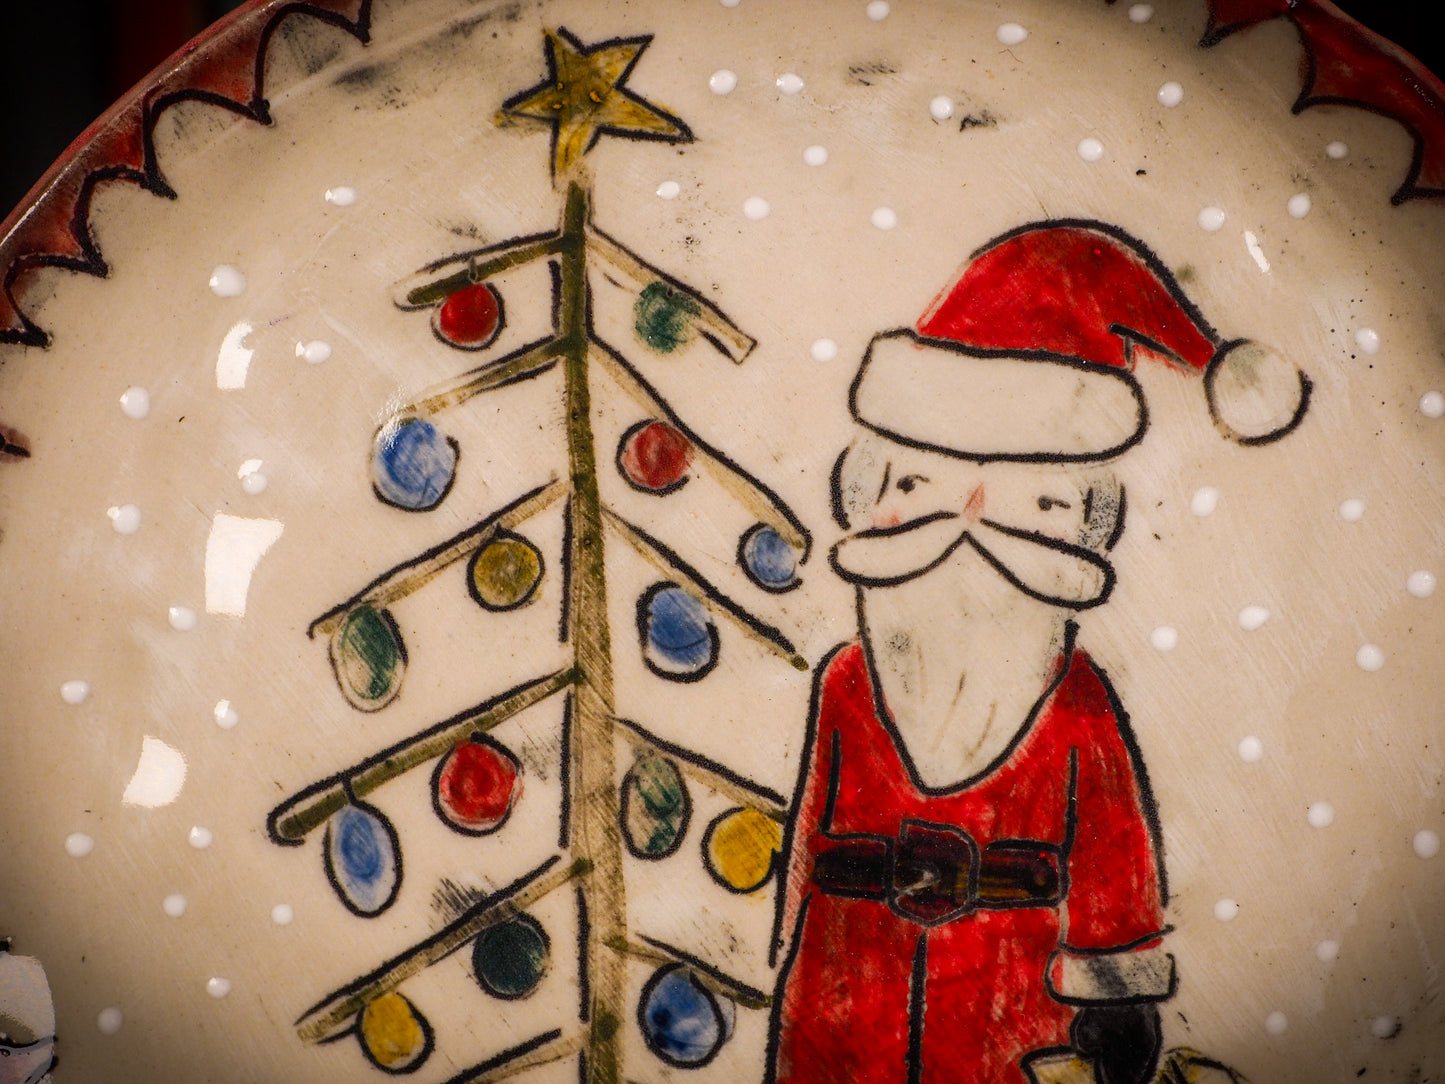 An original Christmas Holiday cake dinner plate round glazed ceramic dinnerware handmade by Idania Salcido, the artist behind Danita Art. Glazed carved sgraffito stoneware, hand painted and decorated, it is illustrated by hand with snowmen, Christmas trees, Santa Claus, angels and snow balls and winter themes.